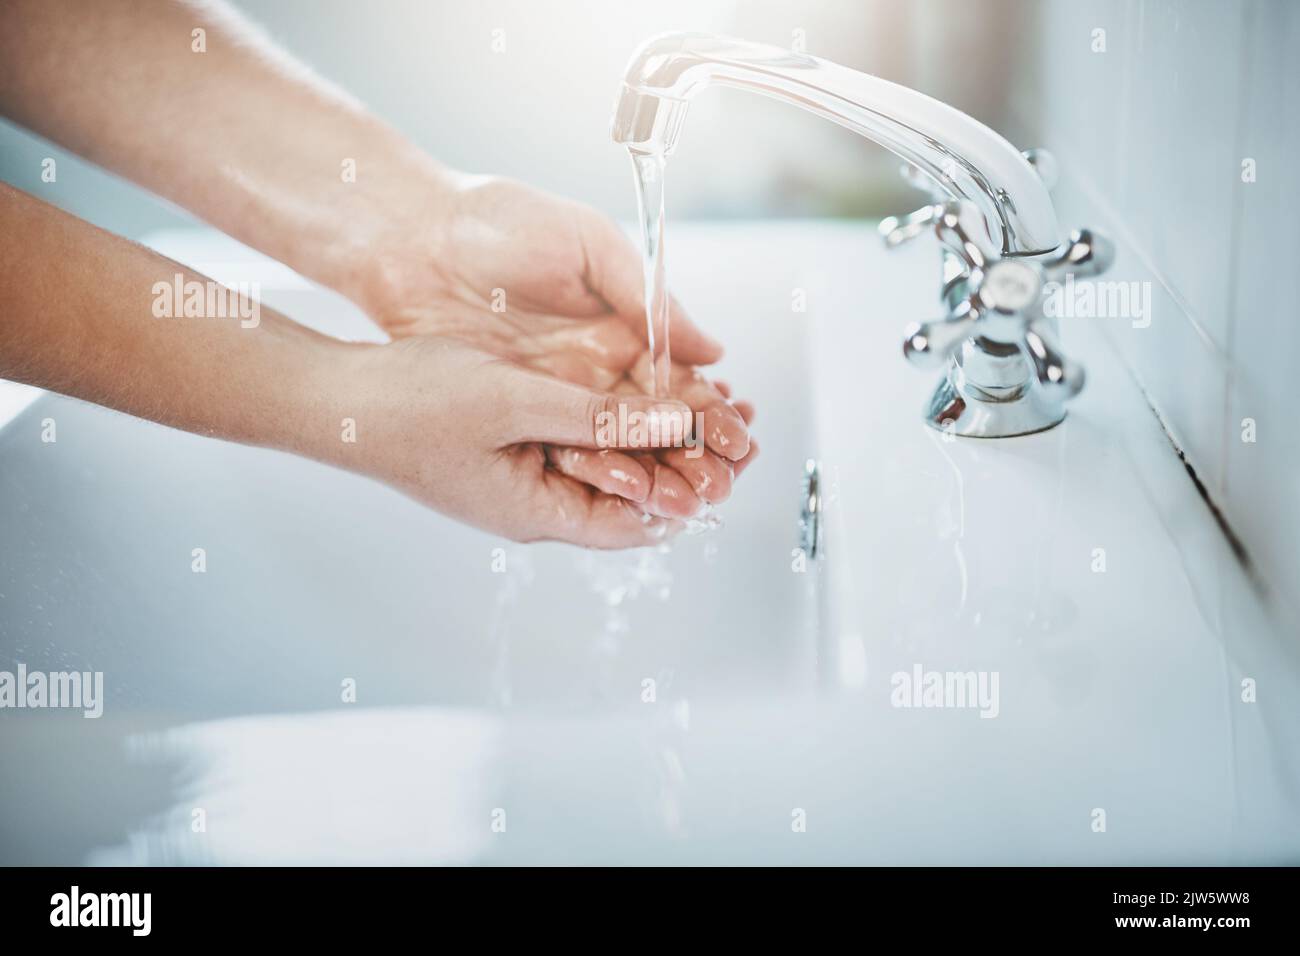 Germs down the drain. hands being washed at a tap. Stock Photo